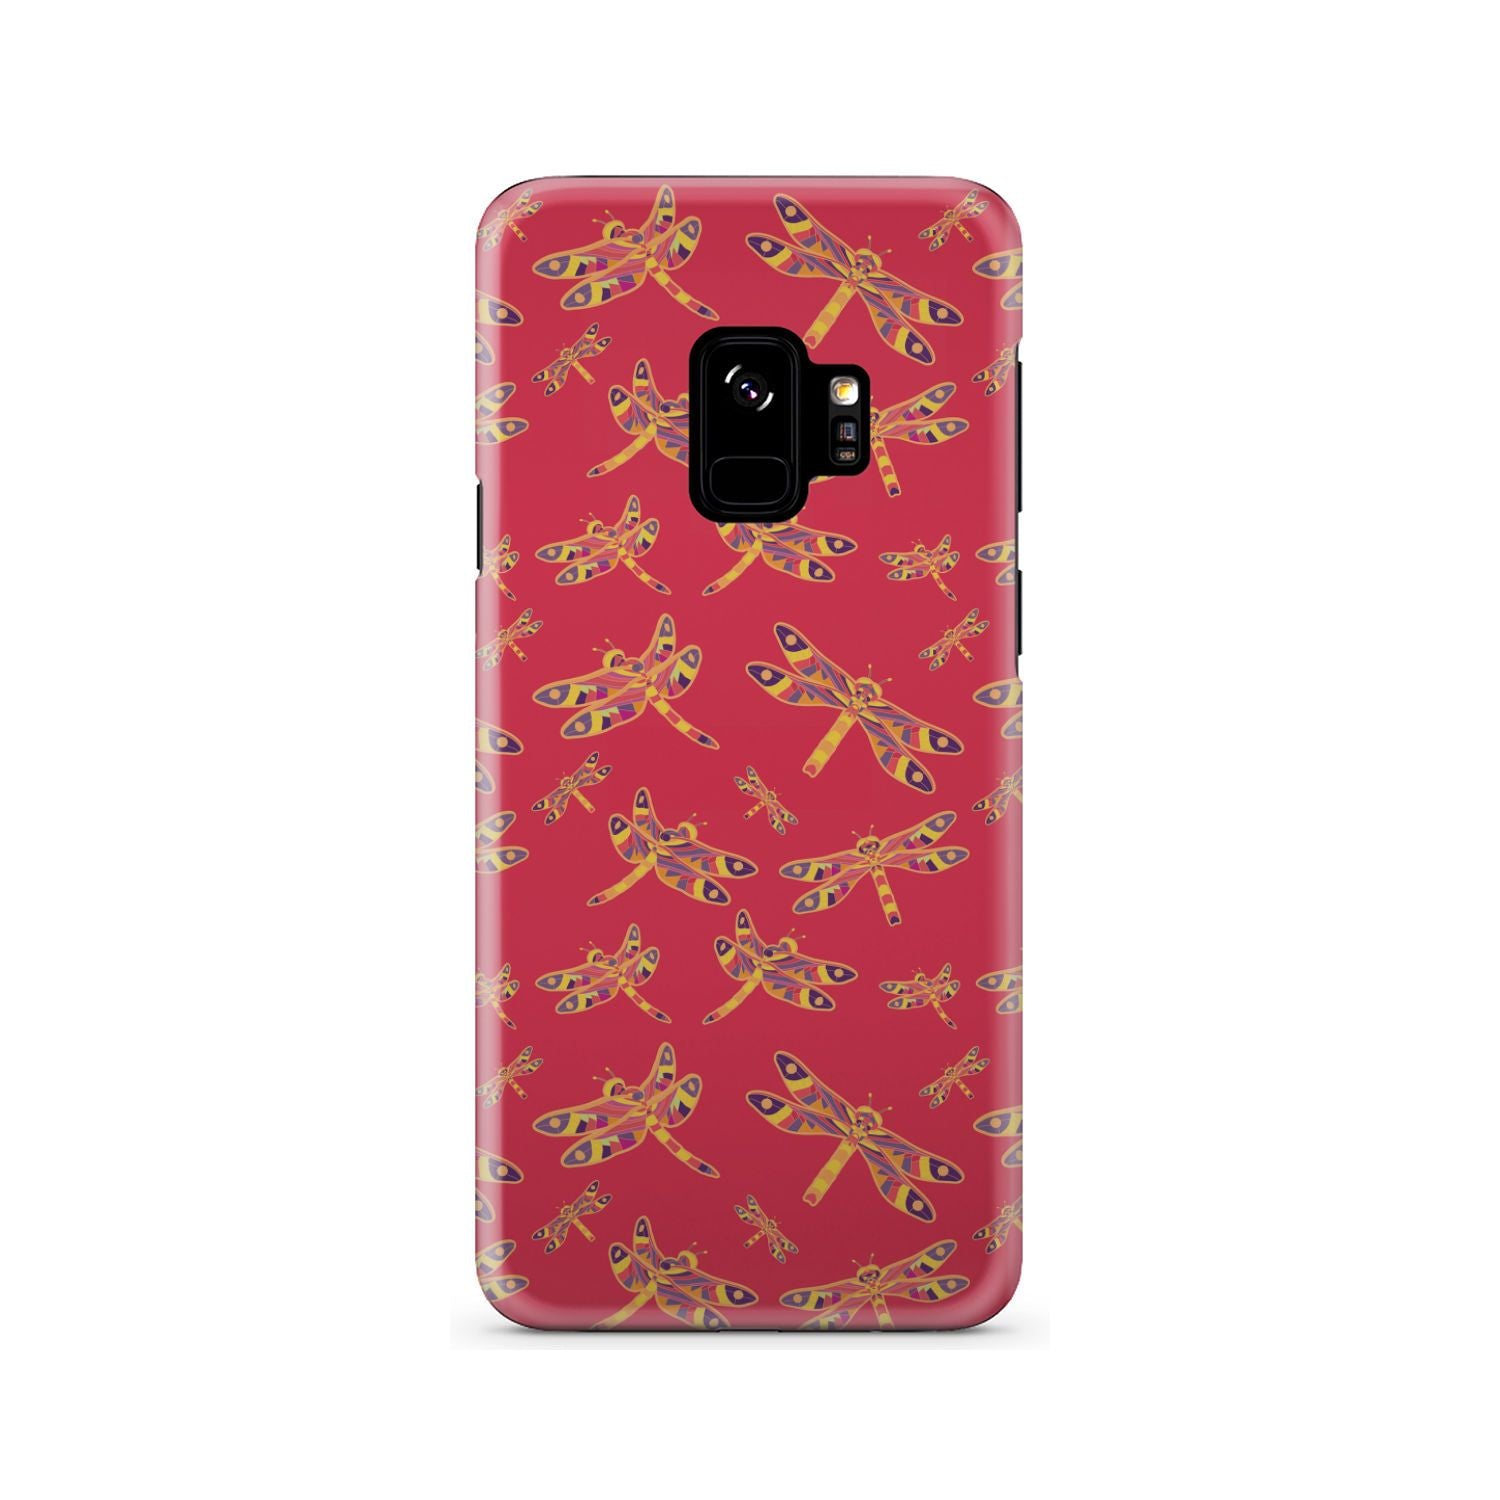 Gathering Rouge Phone Case Phone Case wc-fulfillment Samsung Galaxy S9 